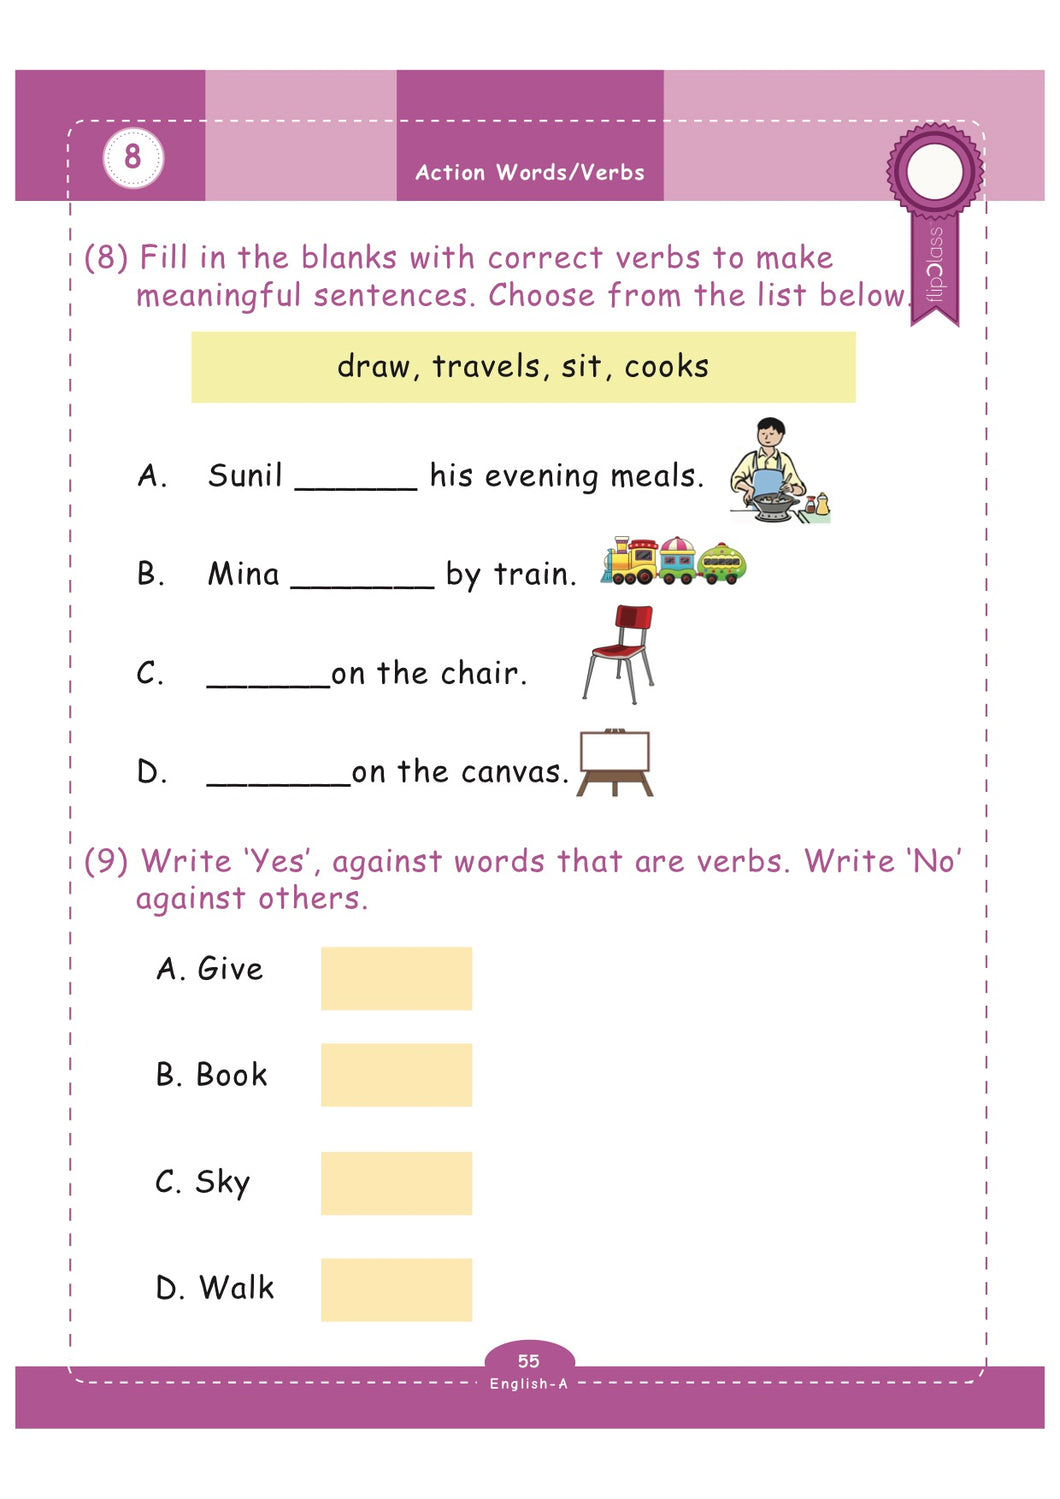 practicing-object-pronouns-worksheet-ideas-for-the-house-pronoun-grade-7-english